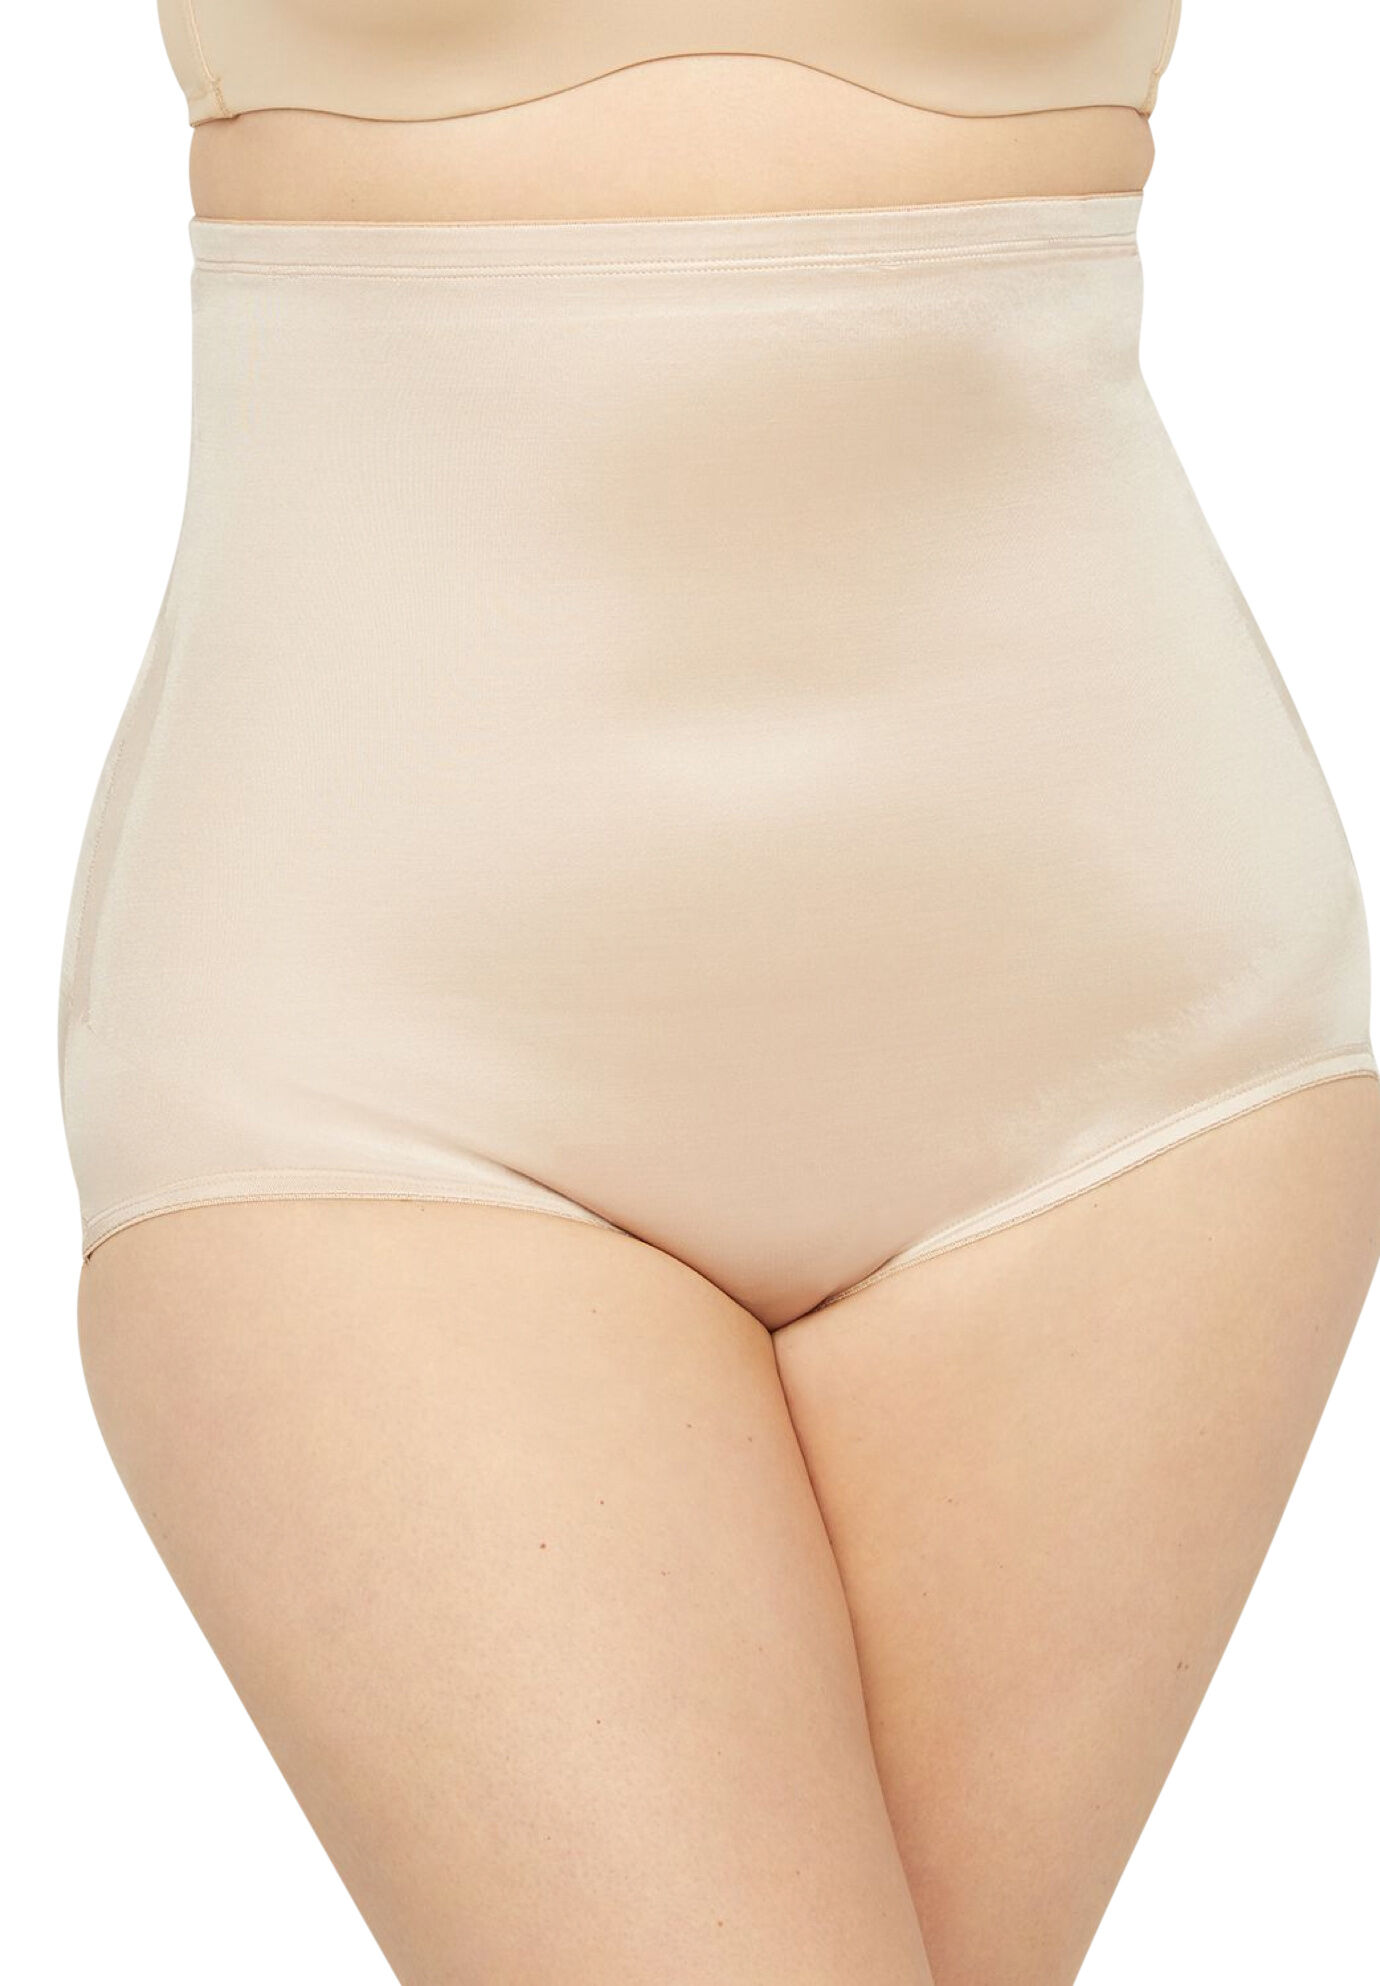 Ladies Super-soft Light Support Shapwear Briefs S,Med,Large,Ex/Large Free Post 